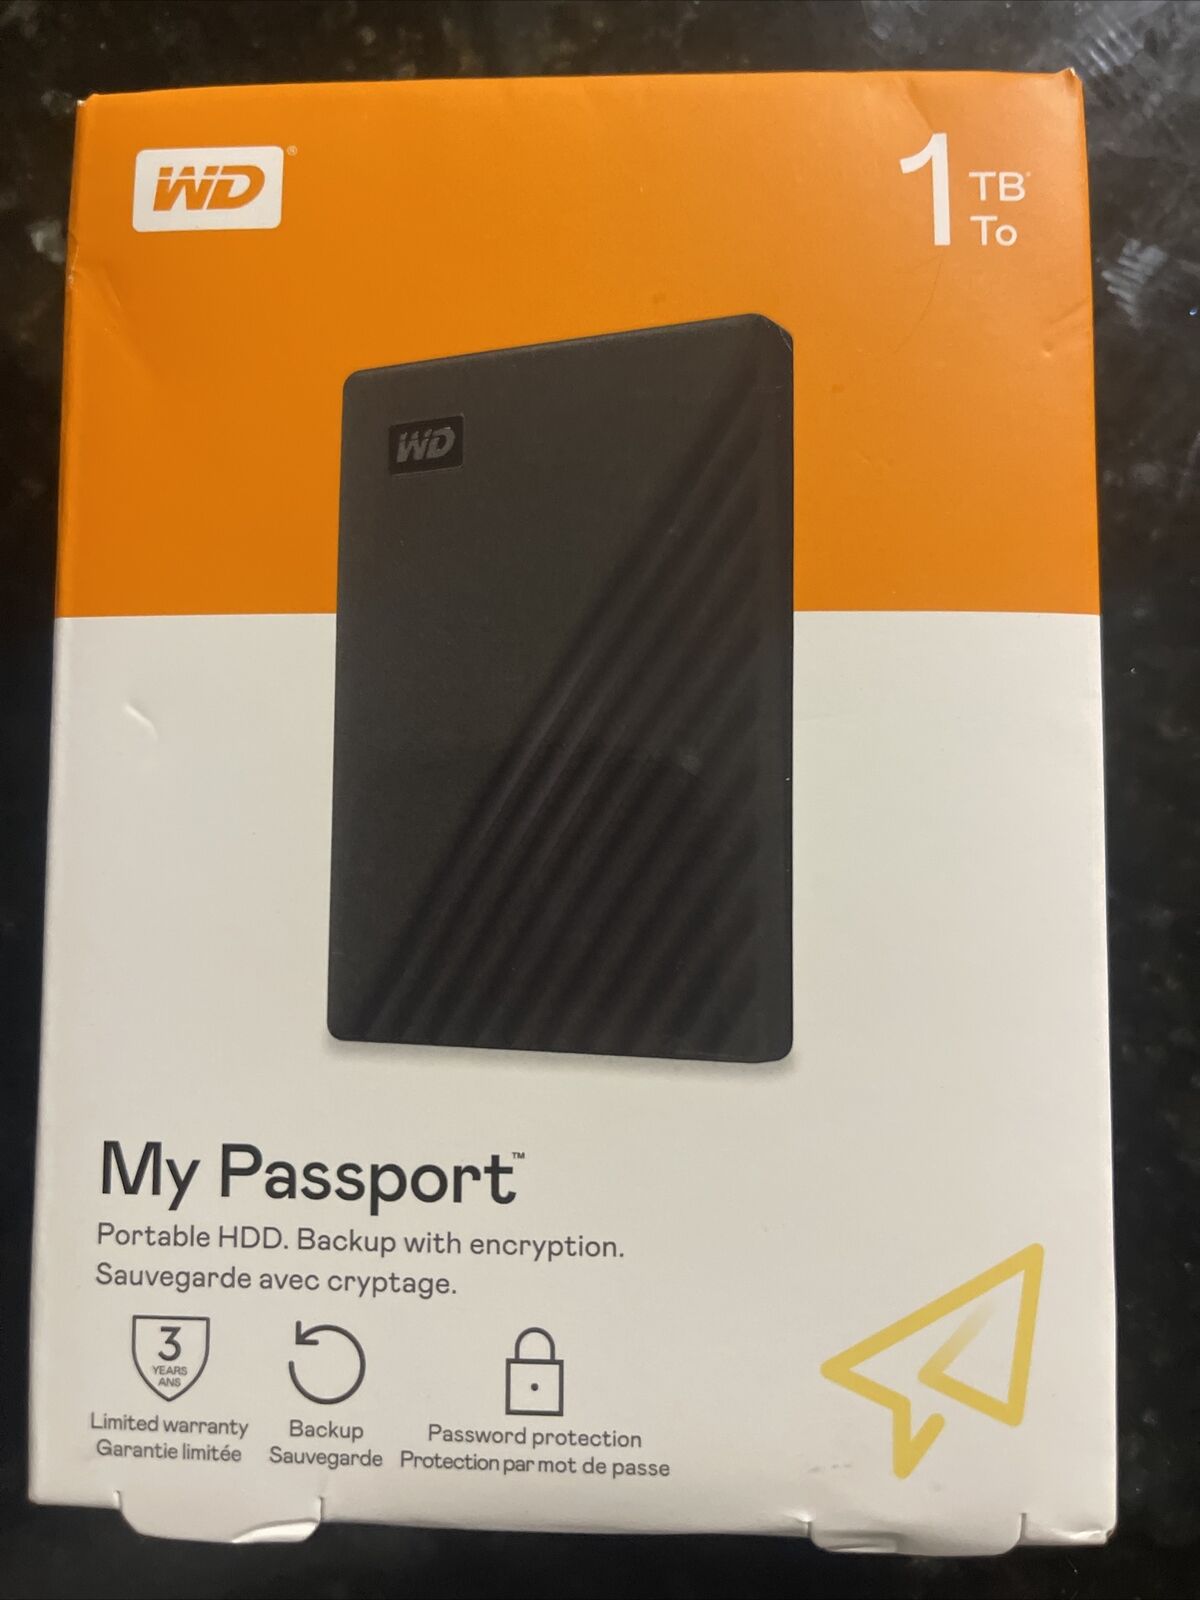 WD My Passport 1TB Portable HDD Backup External Drive Brand New Sealed